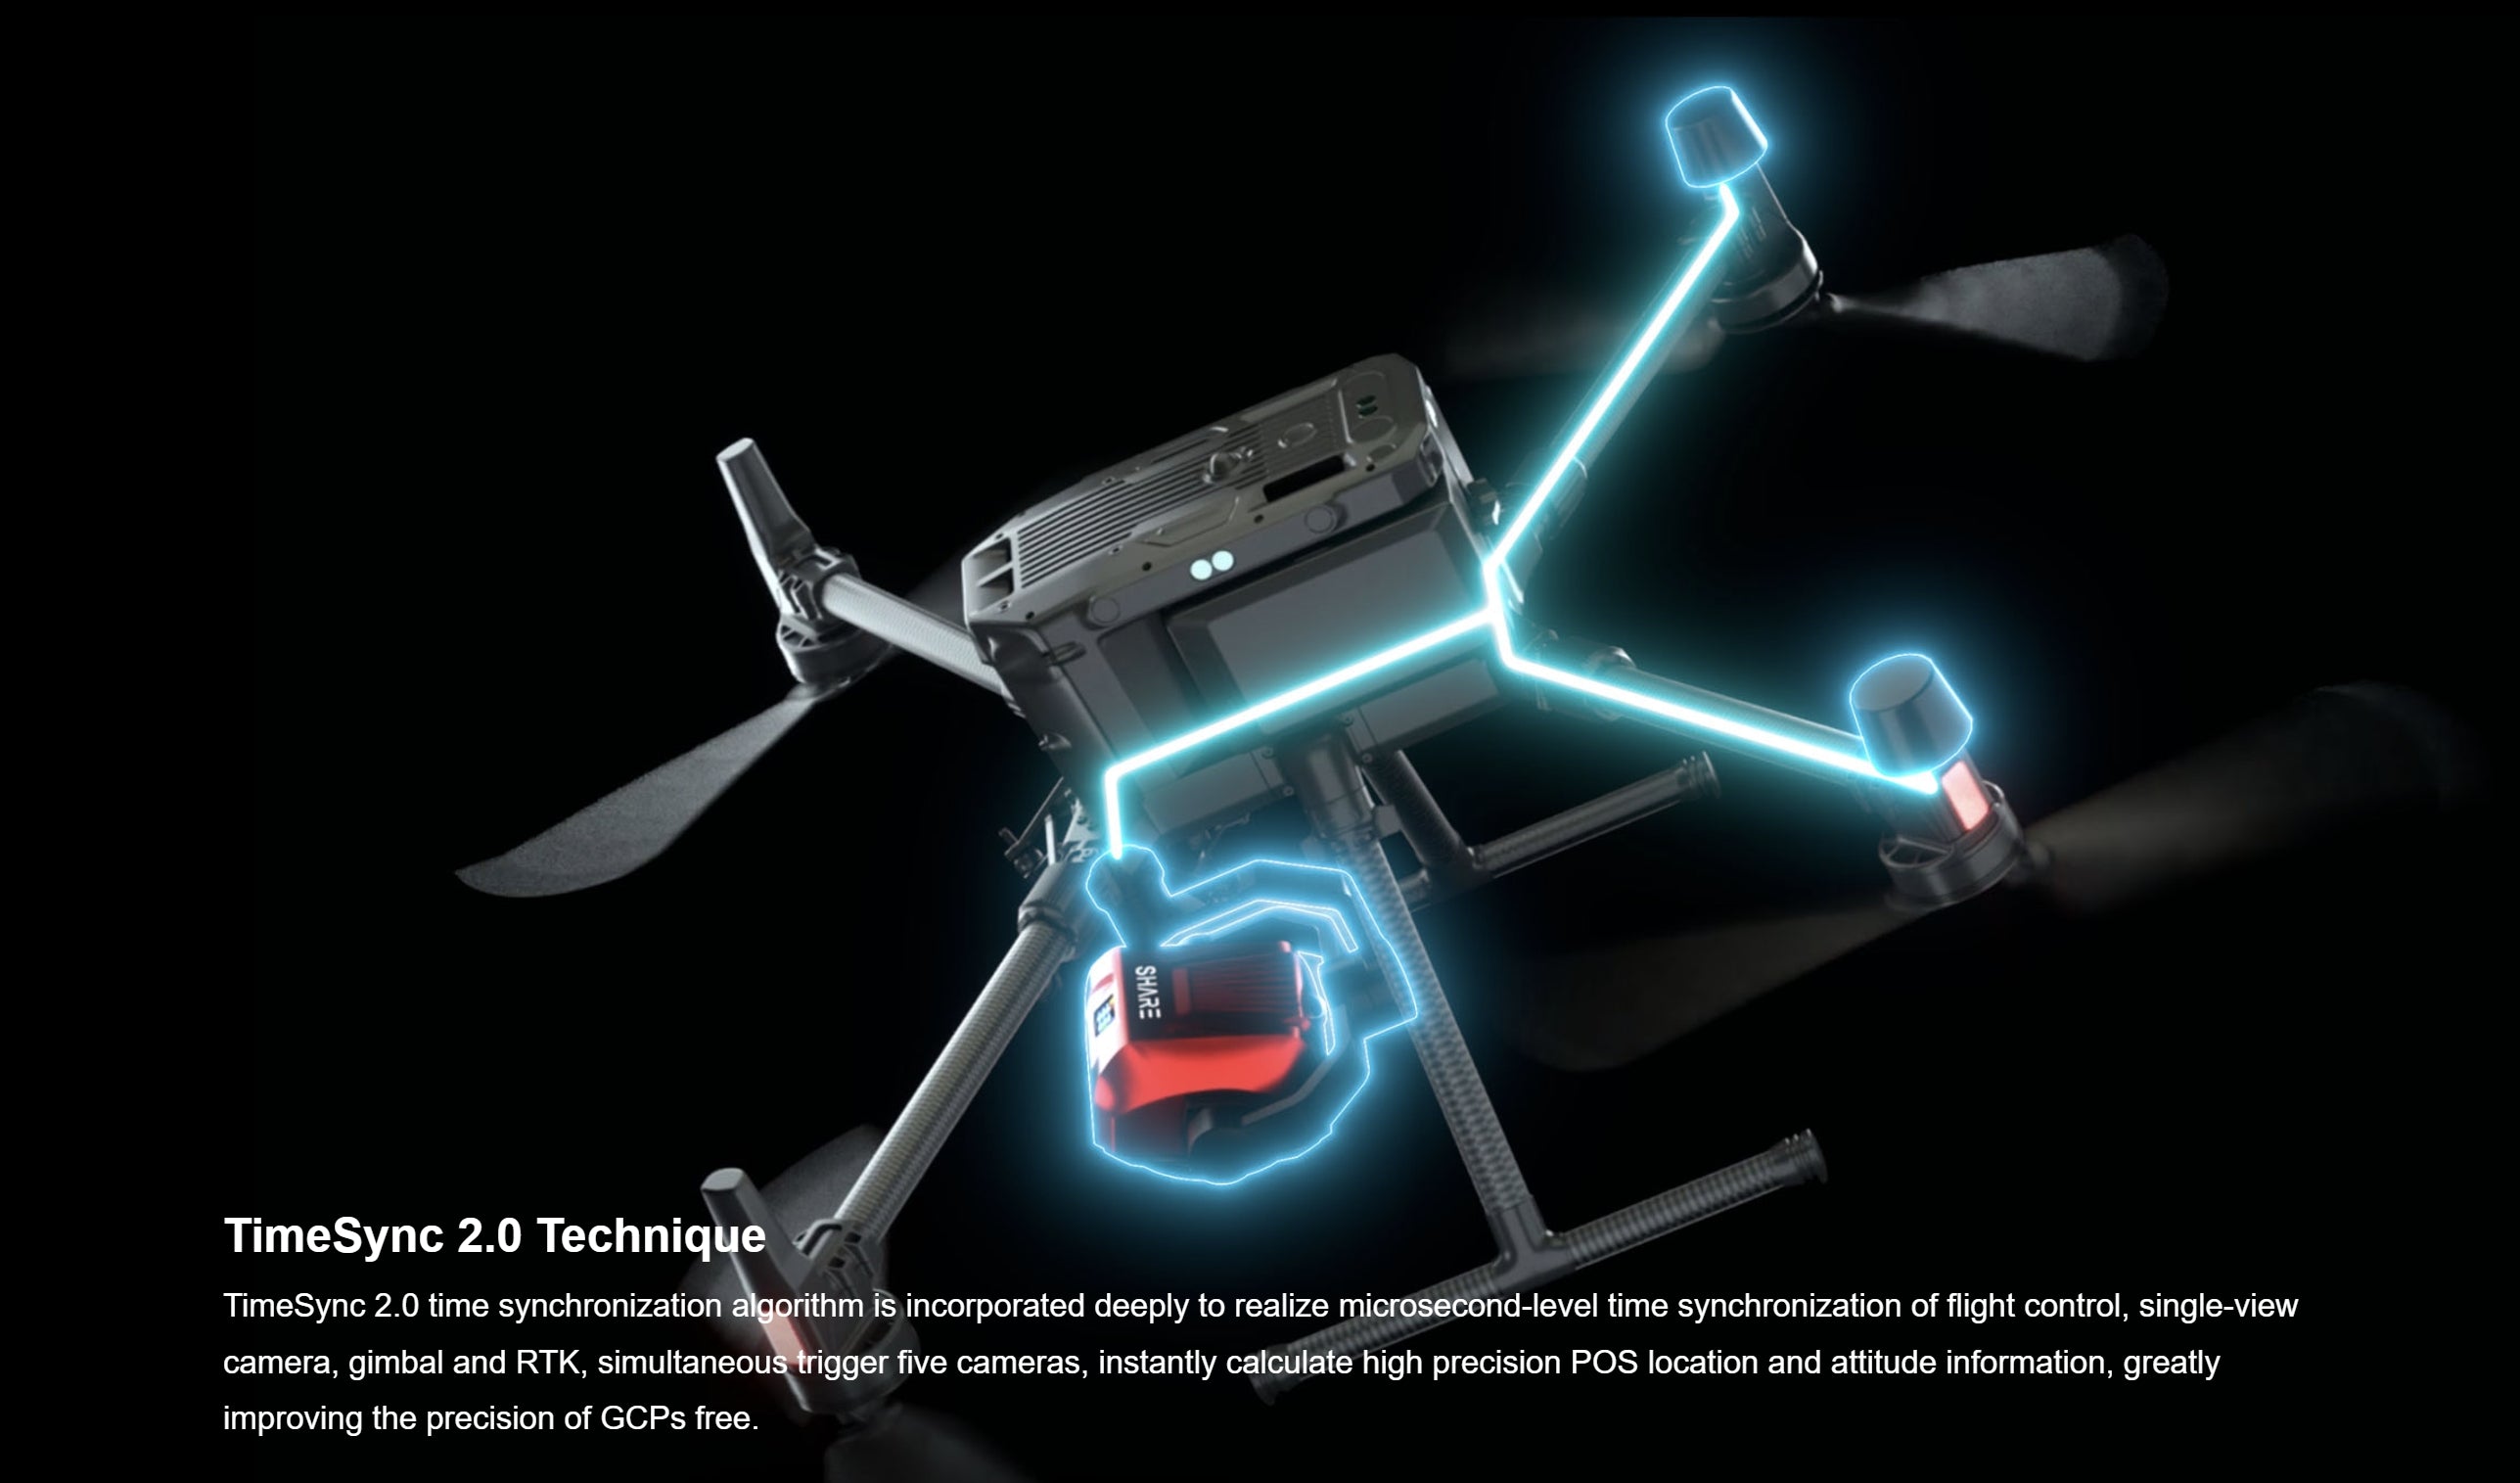 SHARE 304S Pro drone features TimeSync 2.0 for precise microsecond-level synchronization.